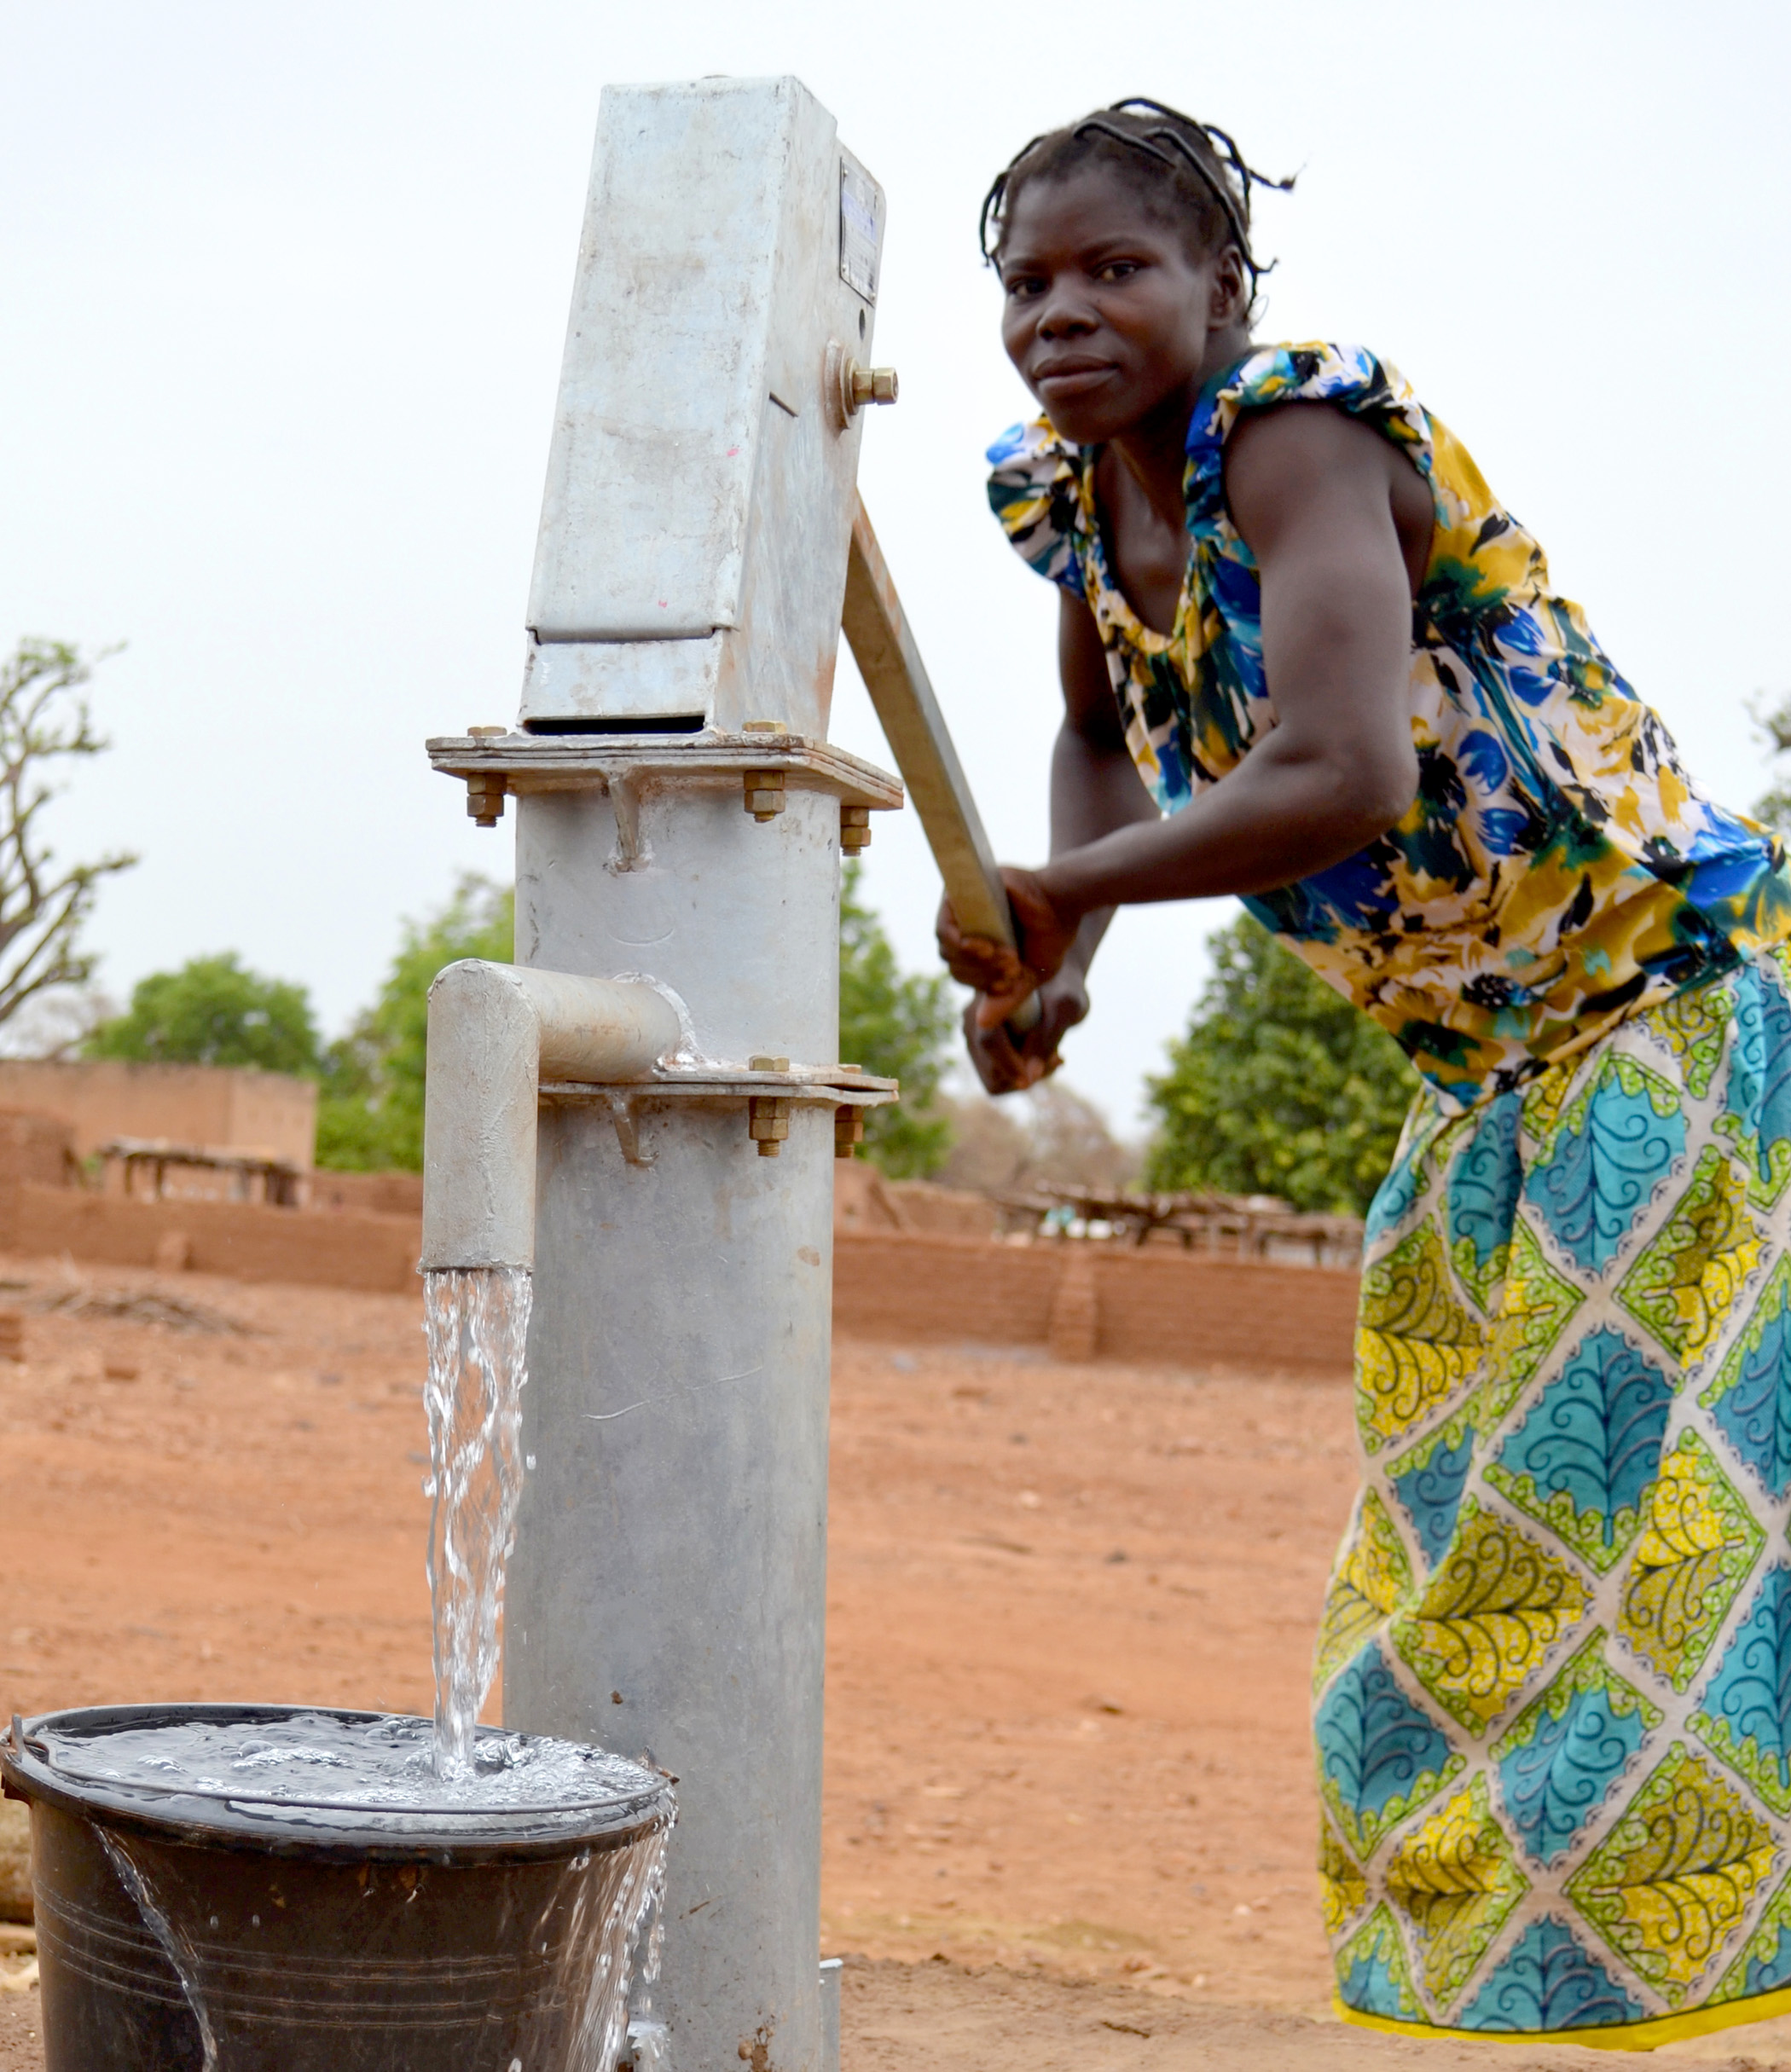 A local woman uses a pump to draw water from the new drilled borehole.